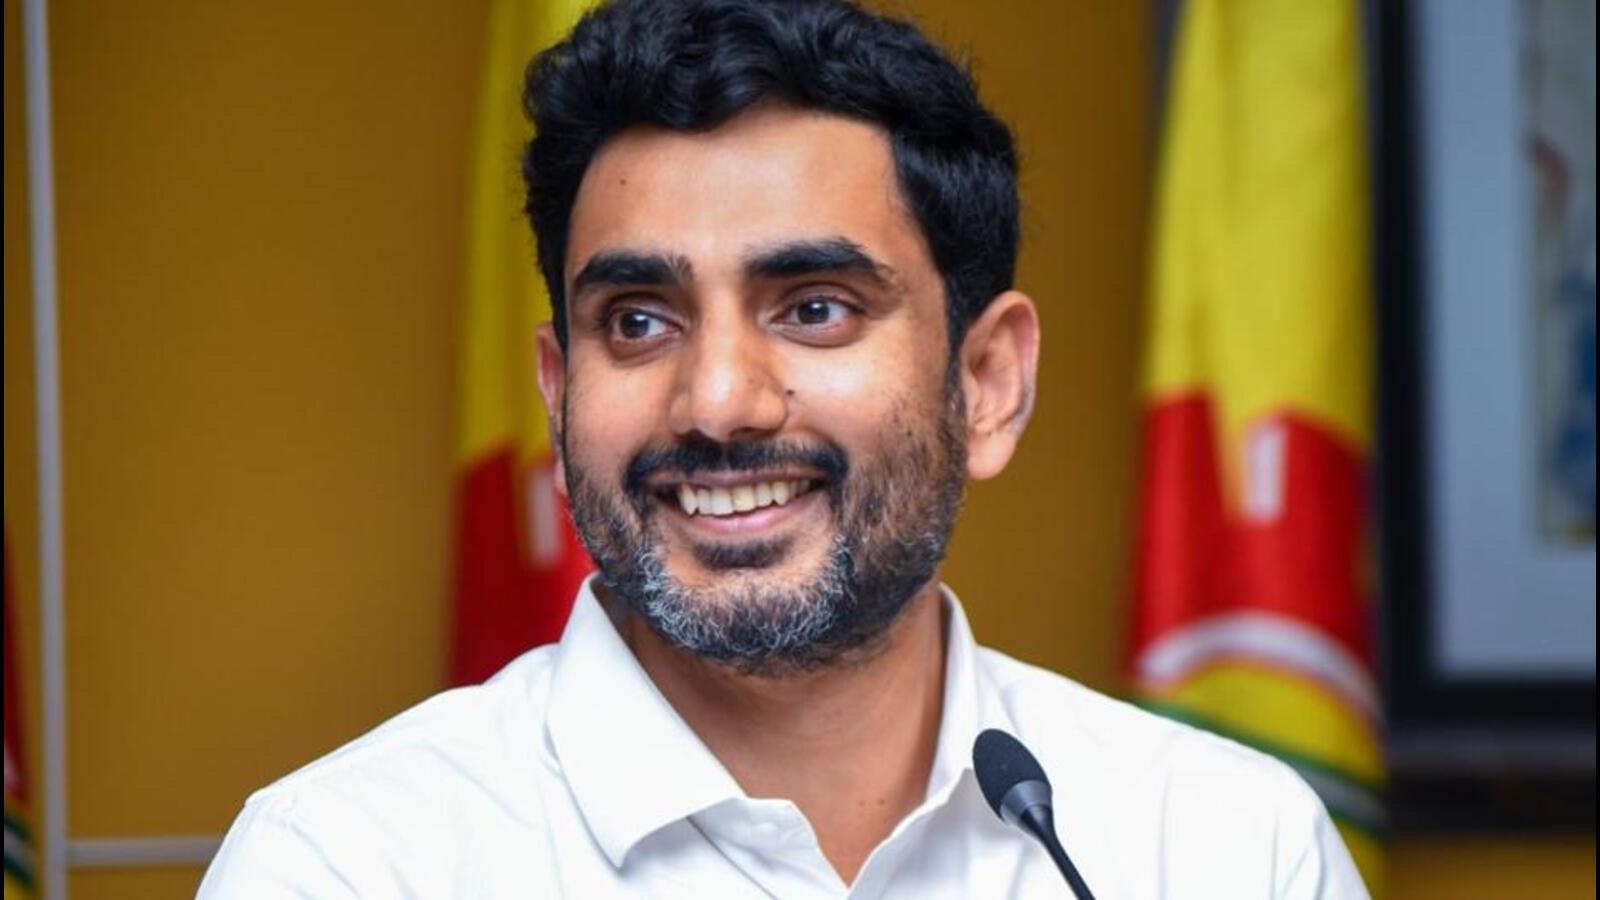 Police give Lokesh nod for foot march amid Andhra ban on rallies | Latest News India - Hindustan Times